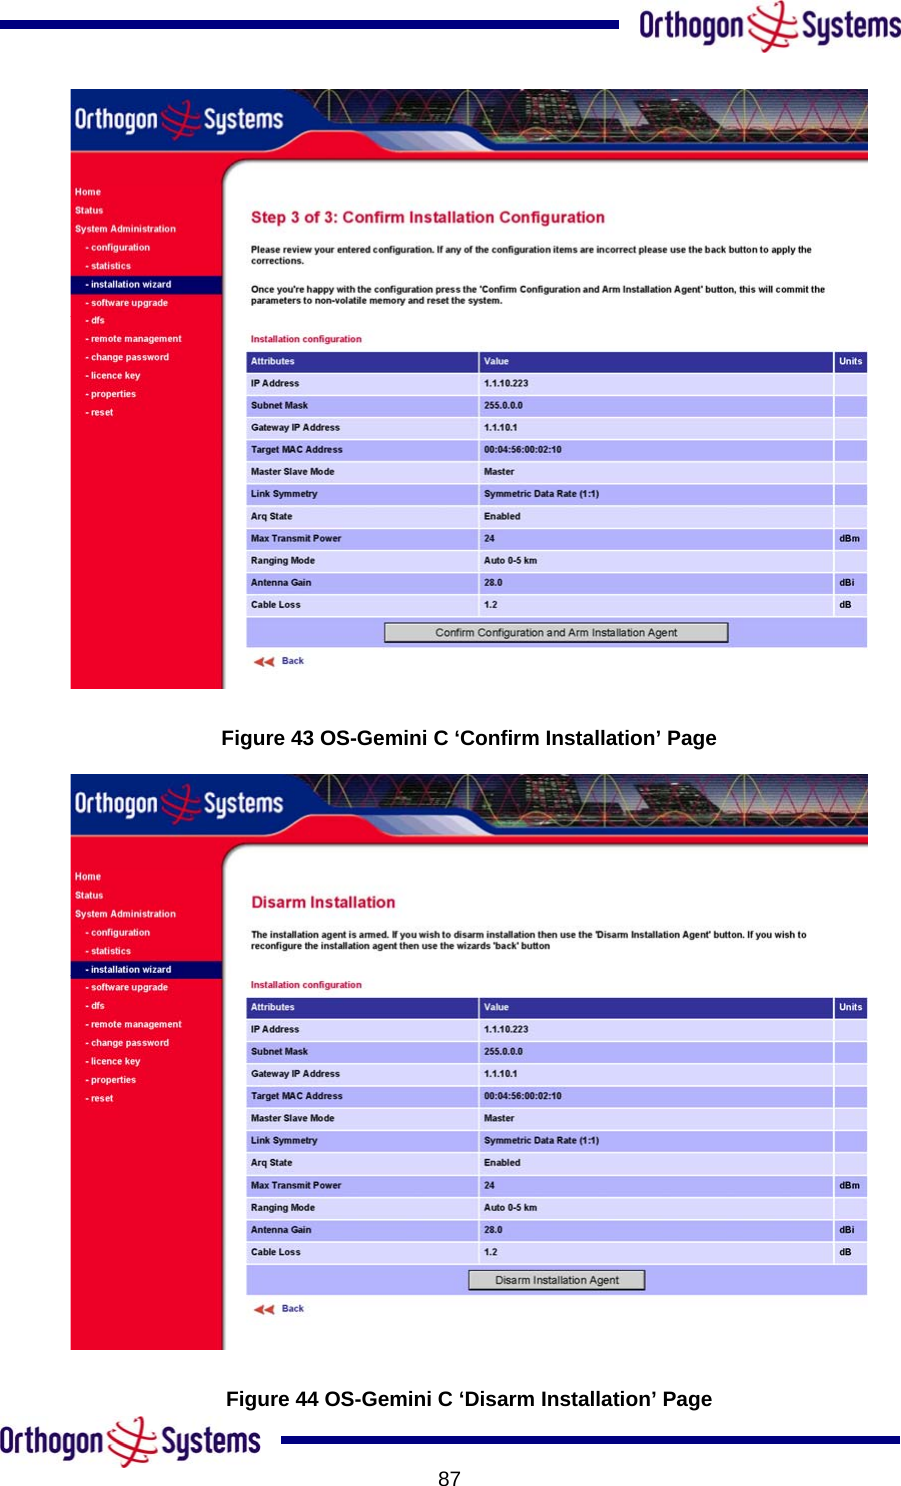           87 Figure 43 OS-Gemini C ‘Confirm Installation’ Page  Figure 44 OS-Gemini C ‘Disarm Installation’ Page 